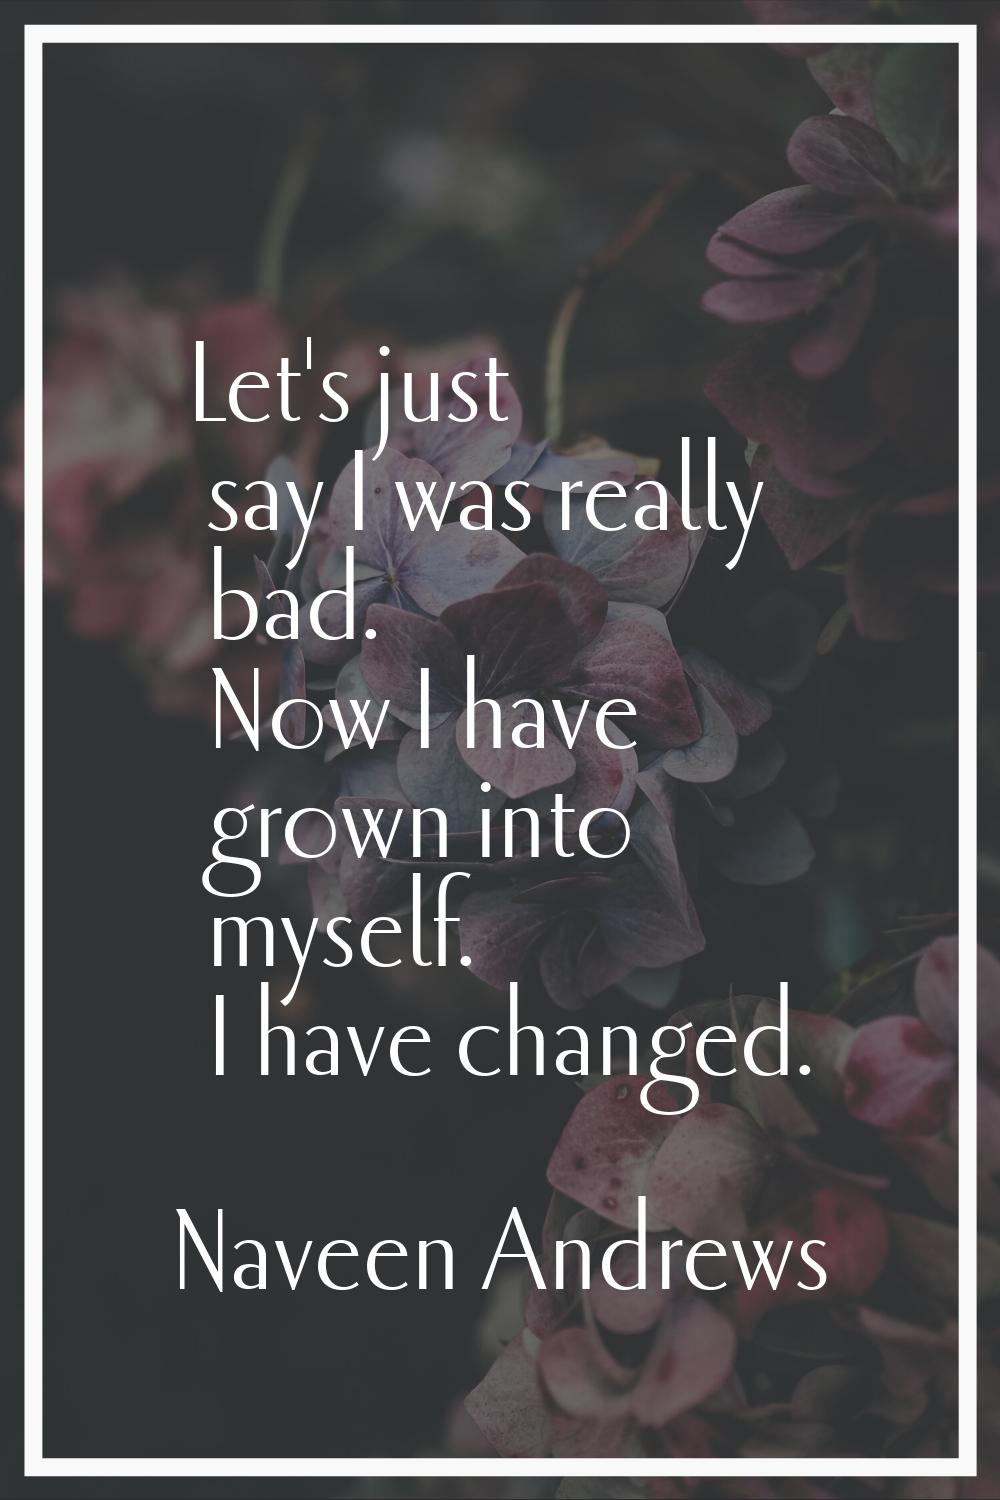 Let's just say I was really bad. Now I have grown into myself. I have changed.